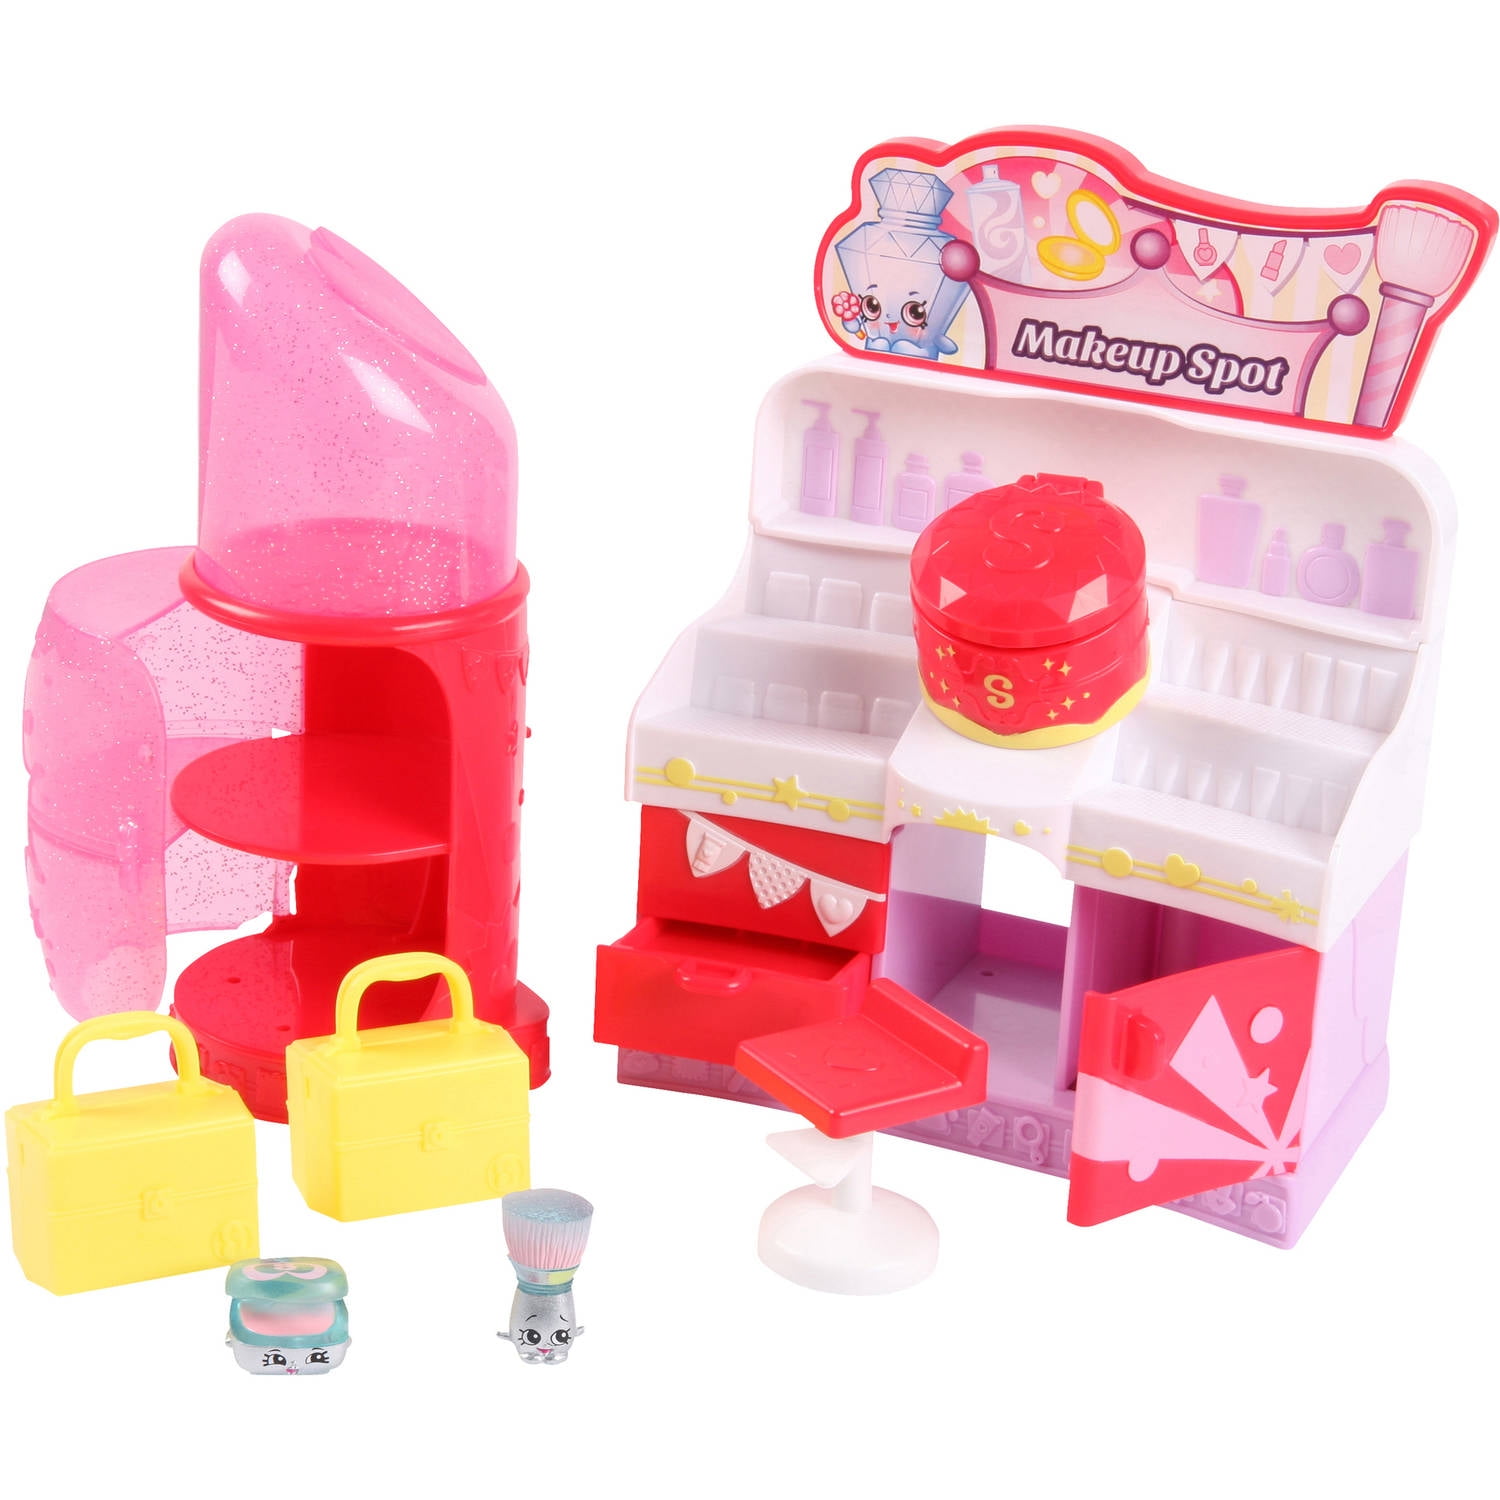 Shopkins Scoops Ice Cream Truck Play Set Educational Toy Game Kids 3 Years 